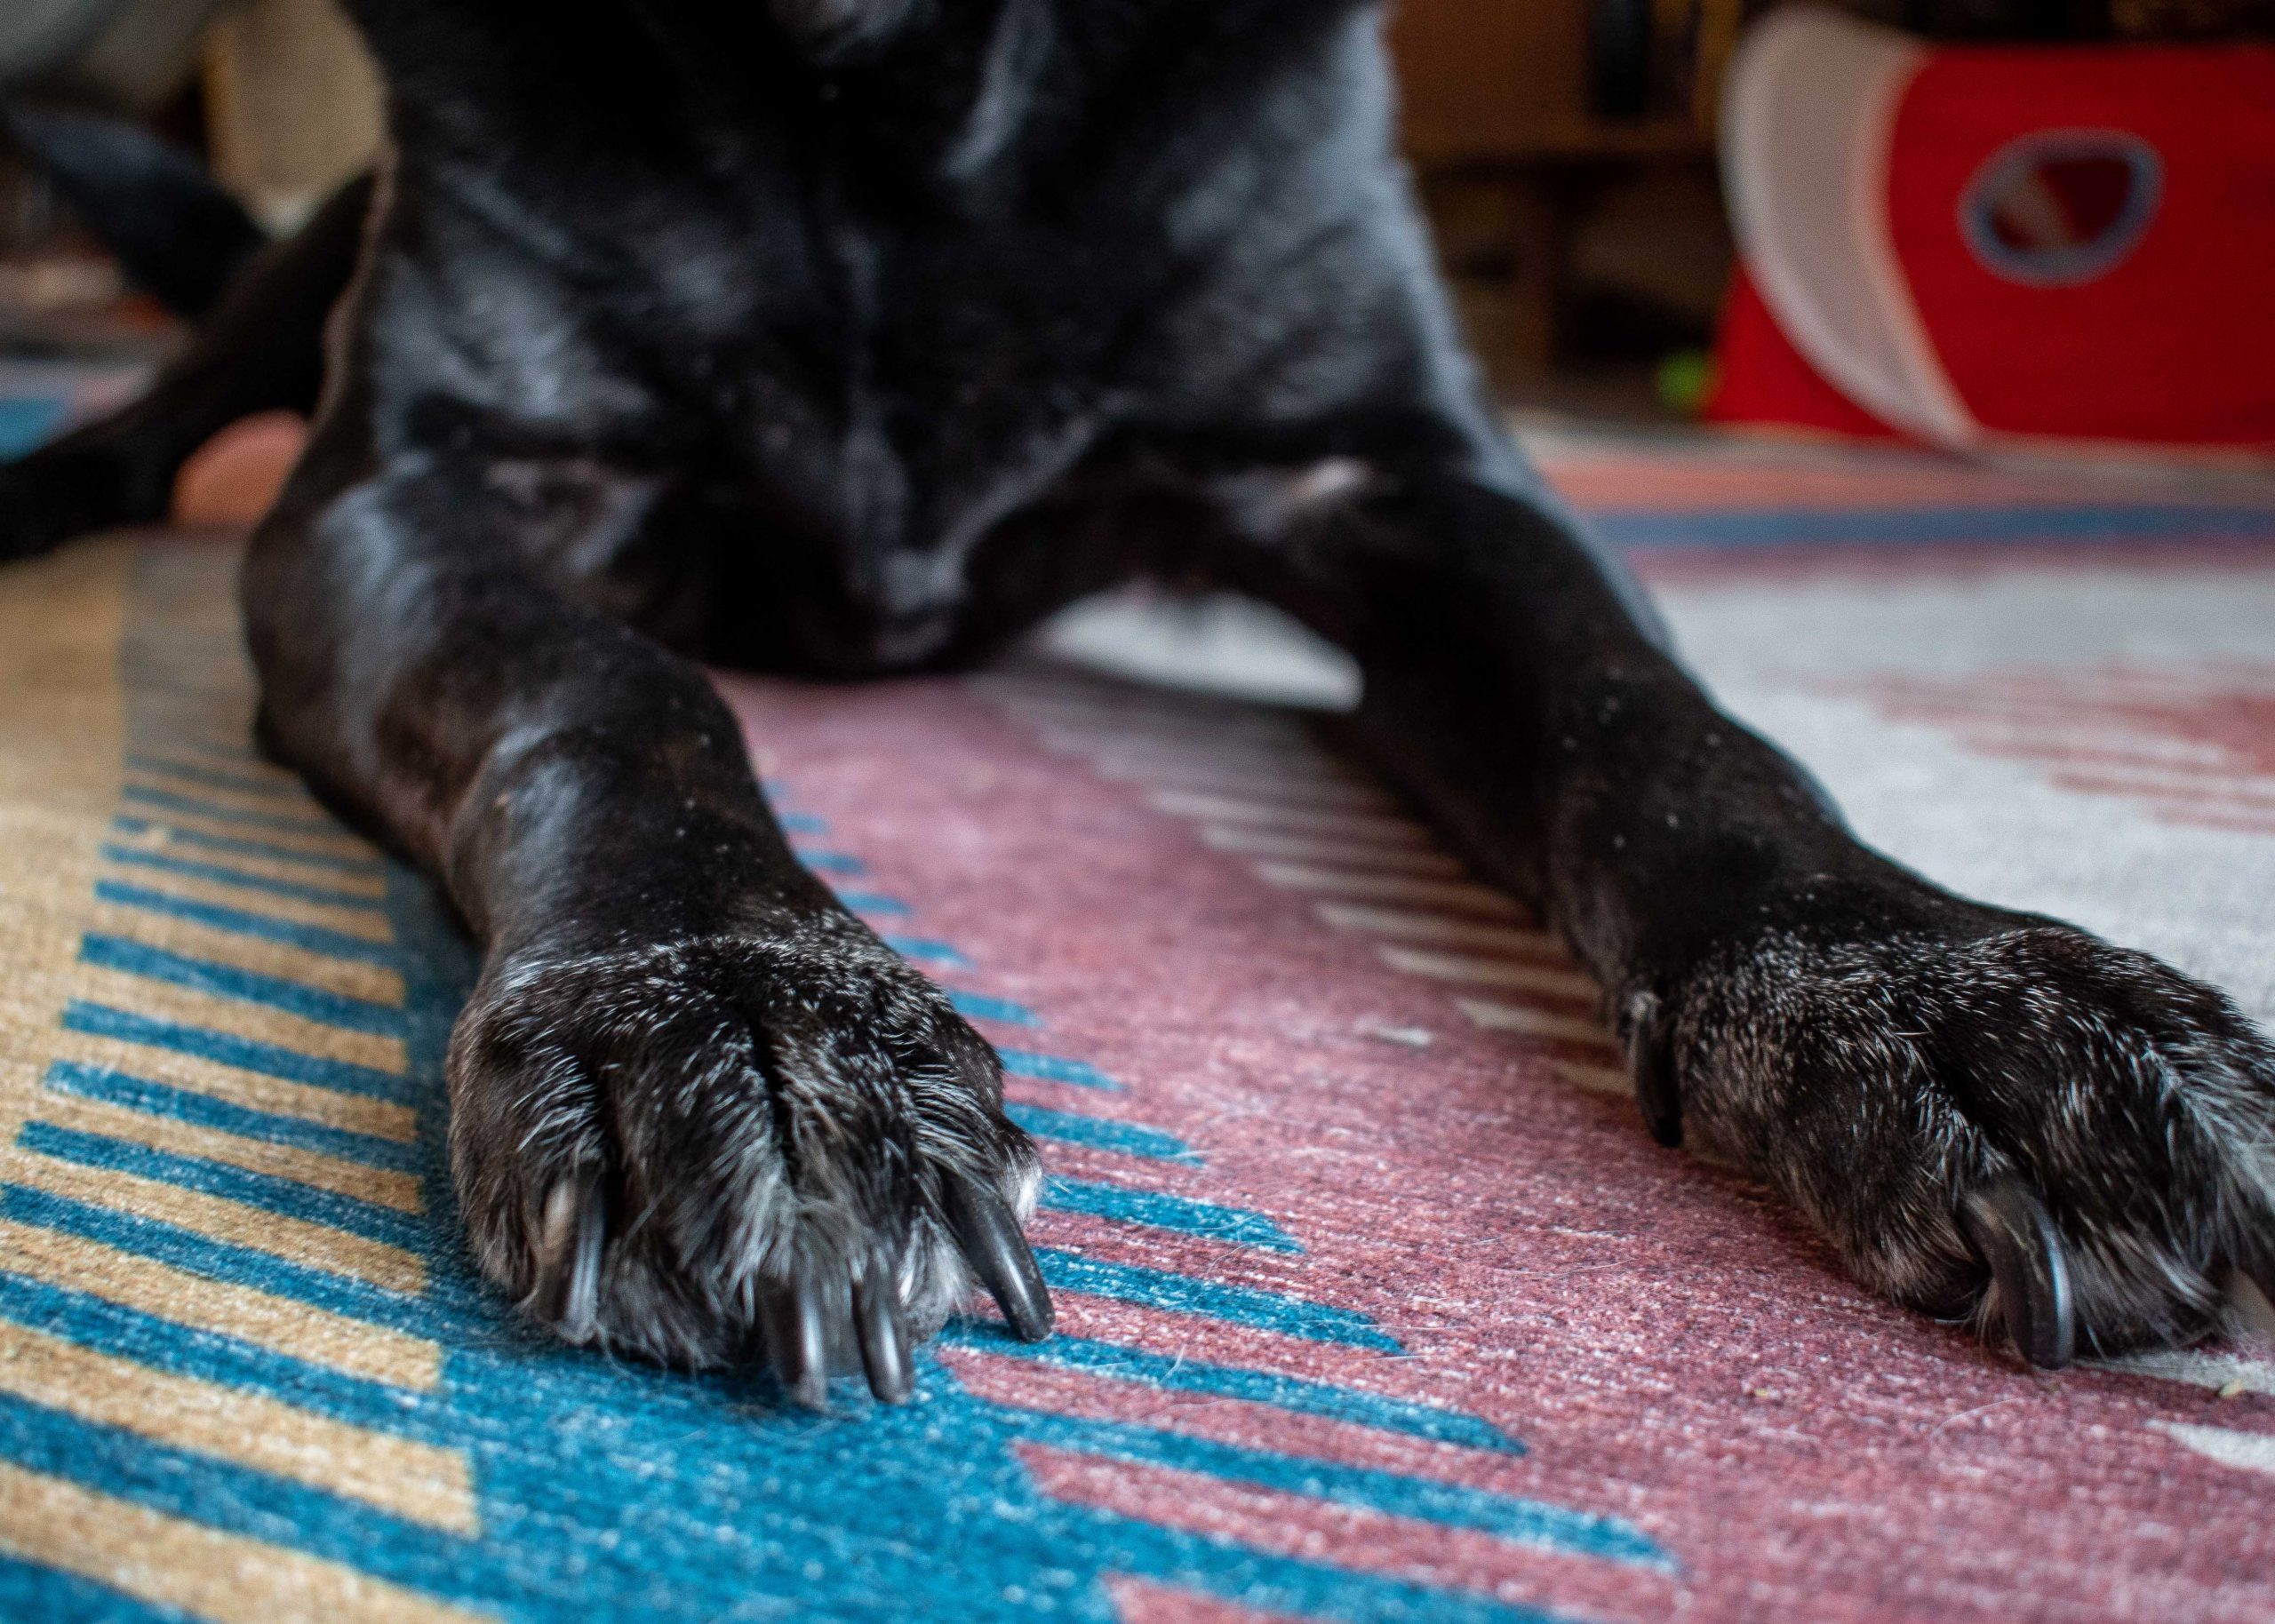 Dog rests paws with long nails on carpet, ready to try a dog nail grinder